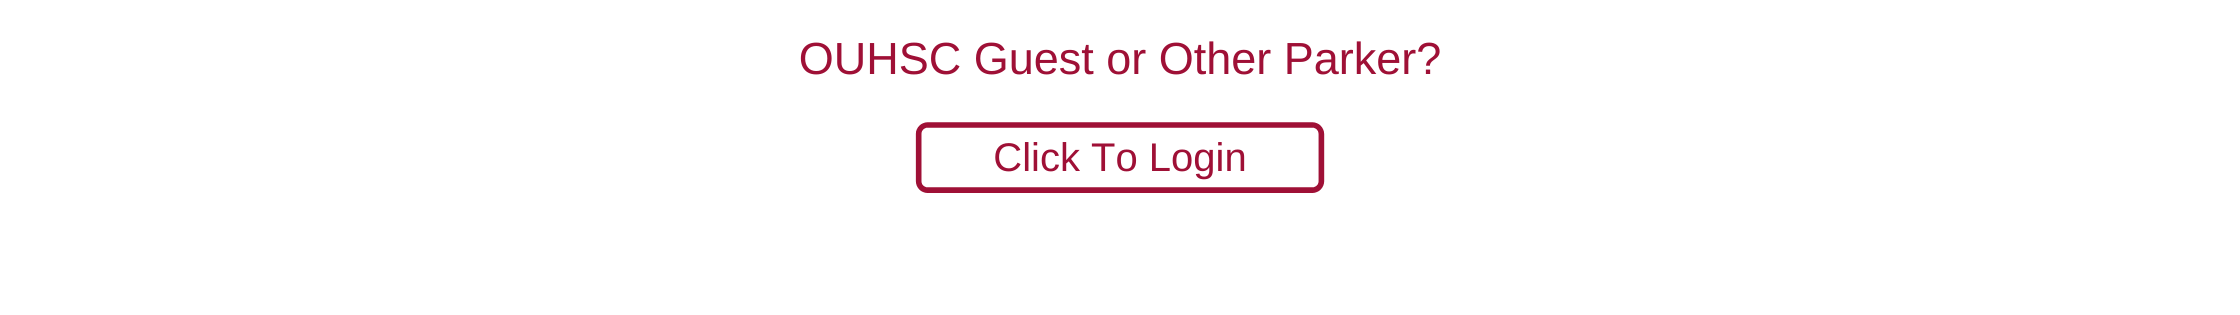 OUHSC Guest or Other Parker Login